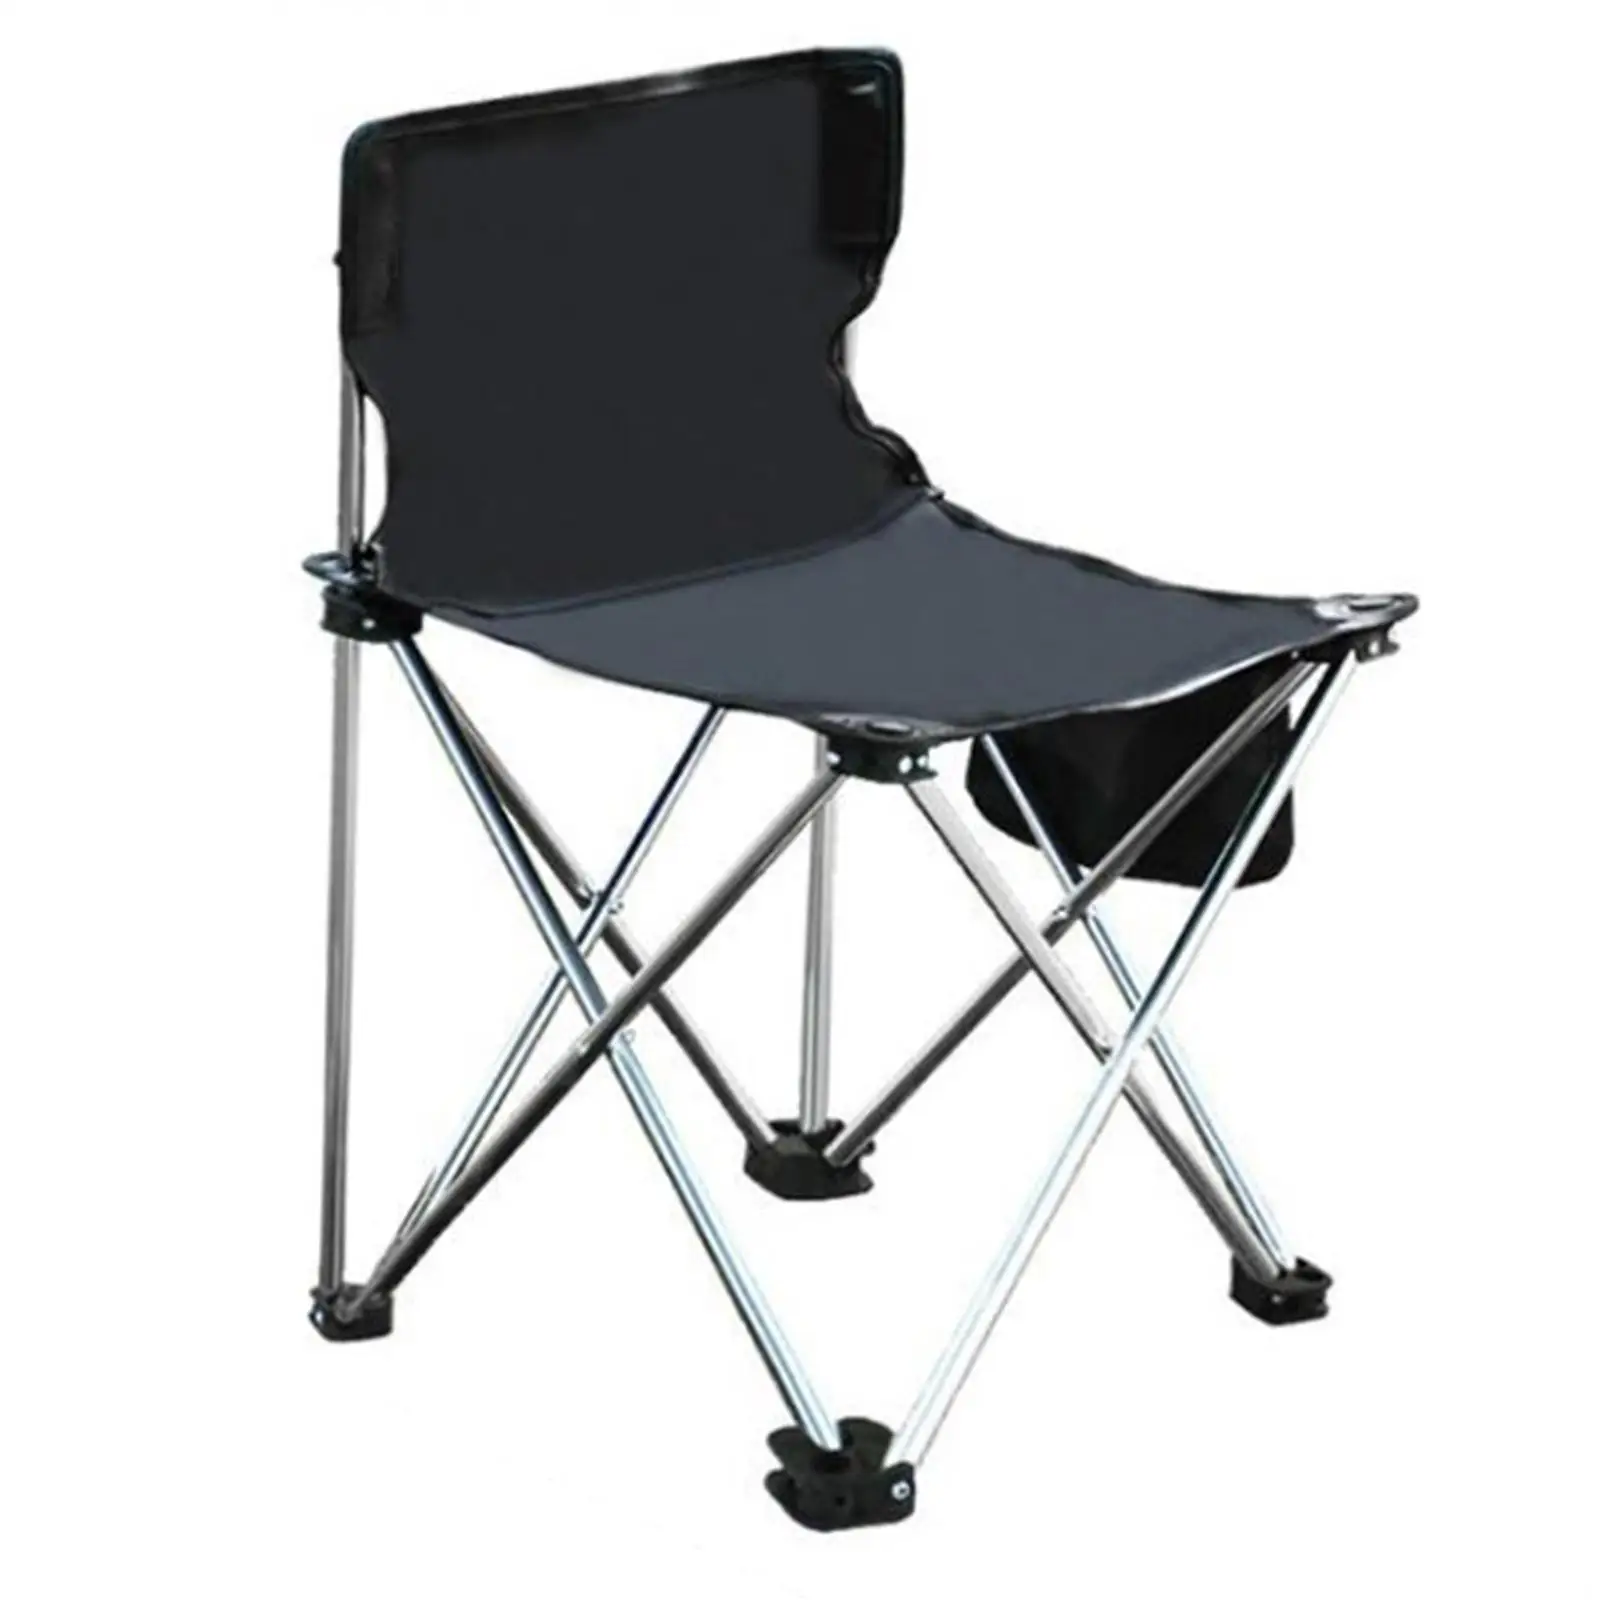 Portable Camping Chair Folding Chair for Outside High Back Collapsible Chair for Patio